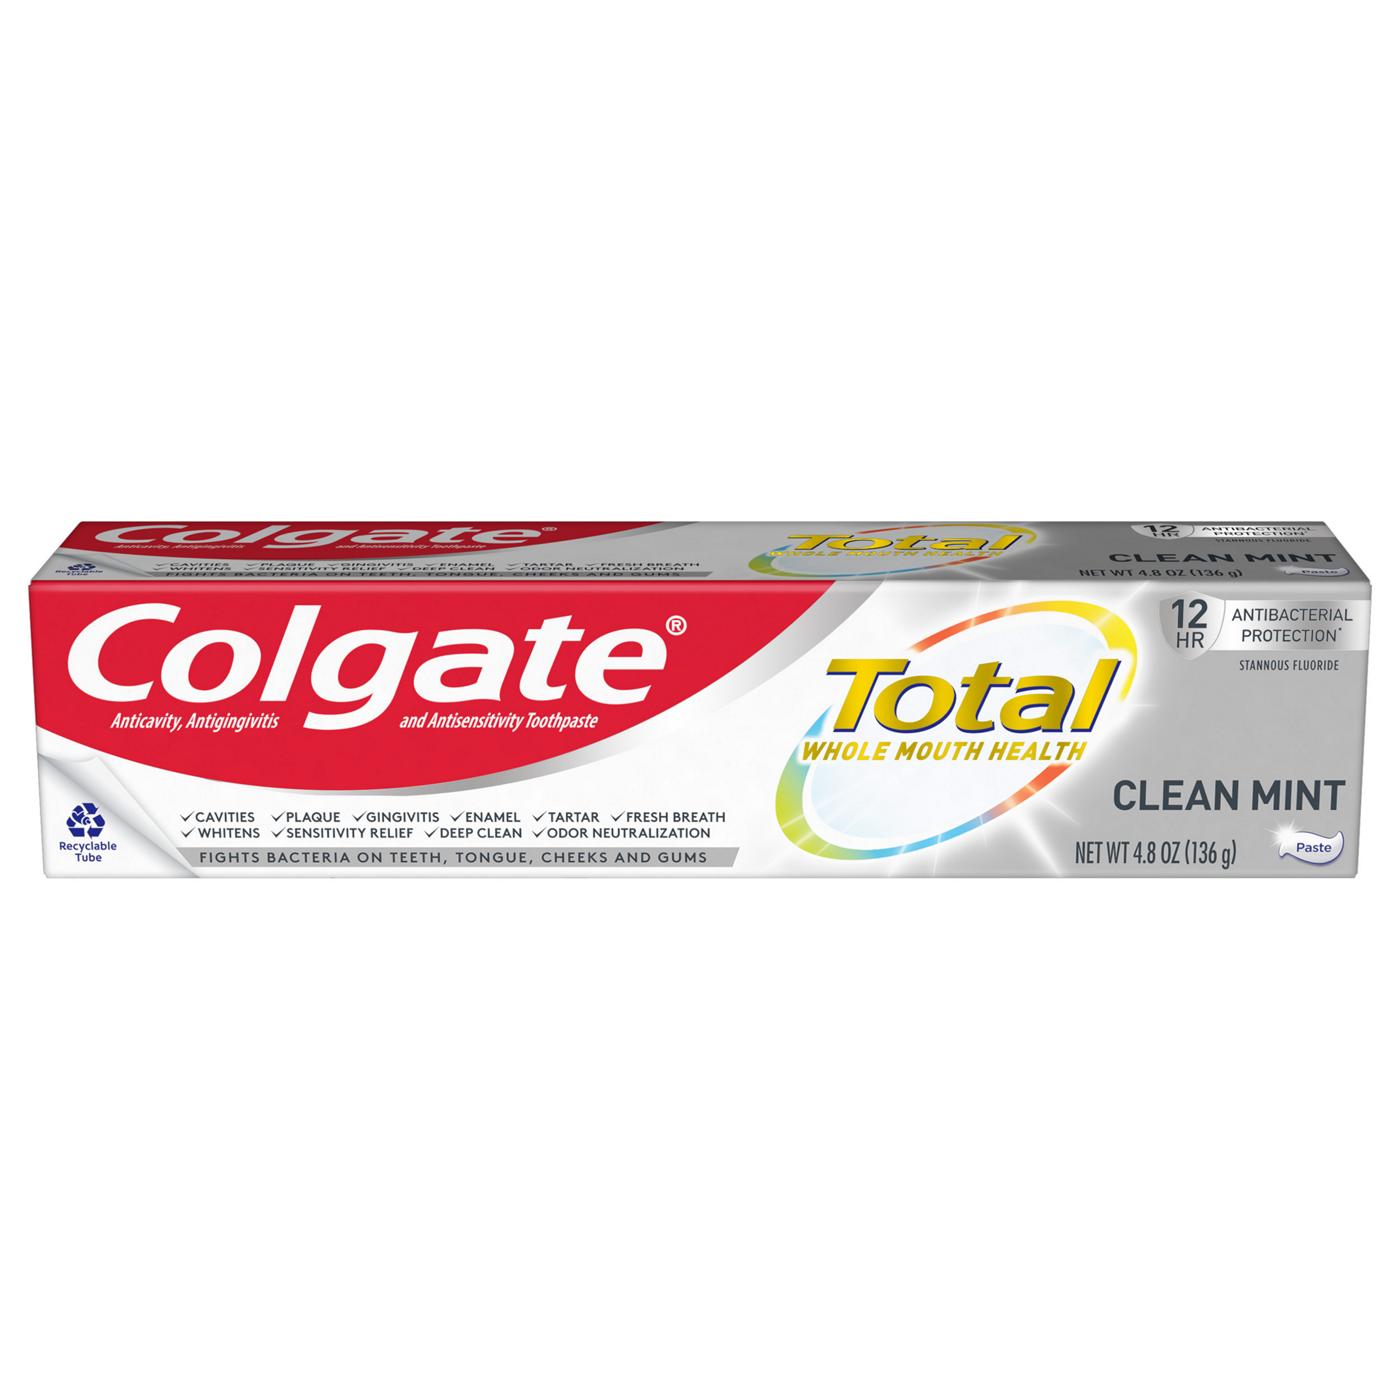 Colgate Total Toothpaste - Clean Mint; image 7 of 13